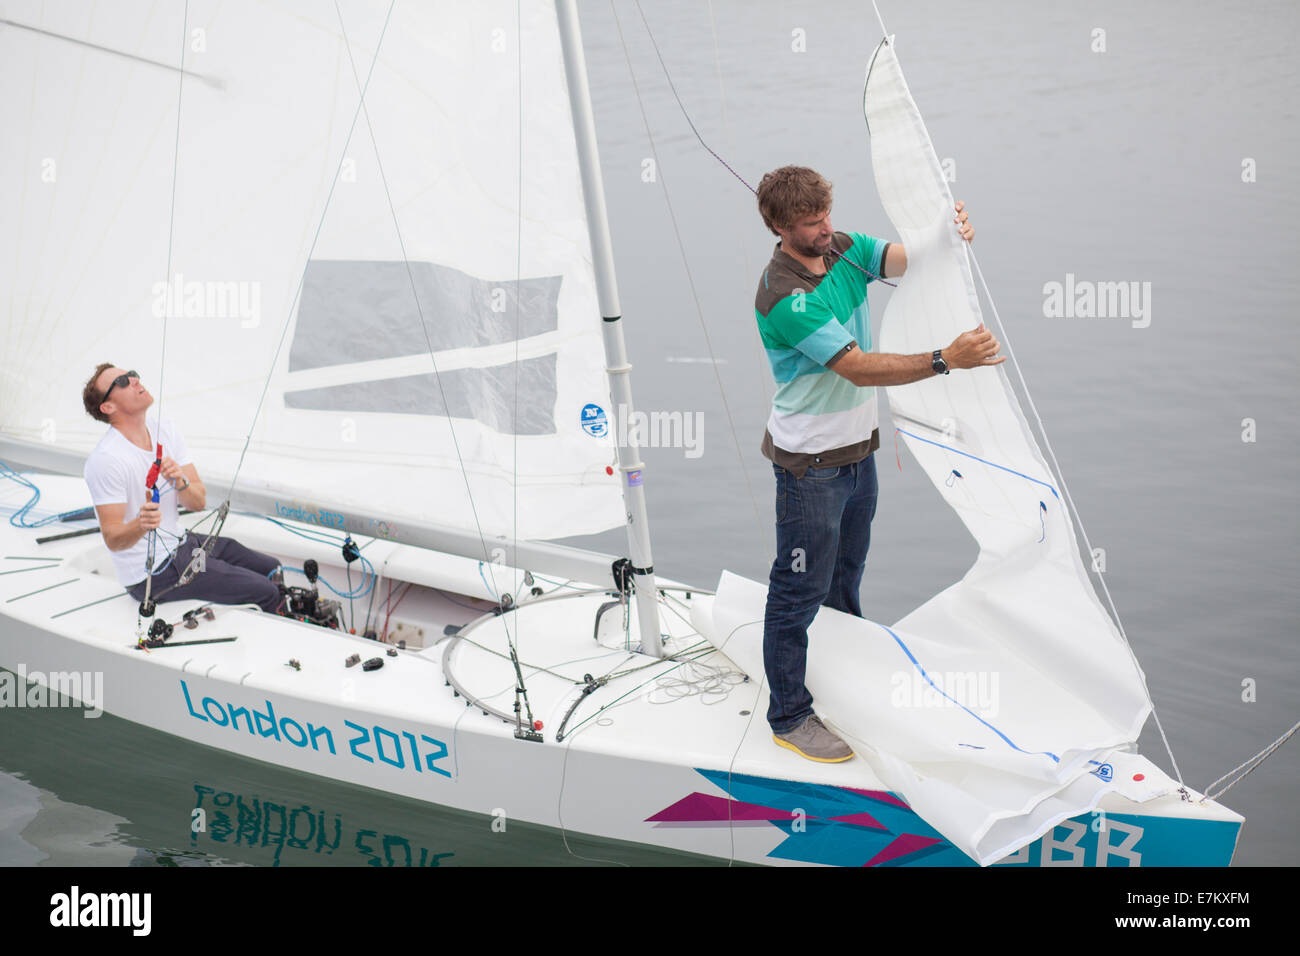 The Andrew Simpson Sailing Centre, Weymouth and Portland National Sailing Academy, Dorset, UK. 20th September, 2014. British gold medalists Paul Goodison MBE (Left) and Iain Percy OBE (Right) preparing for the Bart's Bash sailing event on Sunday 21 September 2014. Credit:  Jak Bennett/Alamy Live News Stock Photo